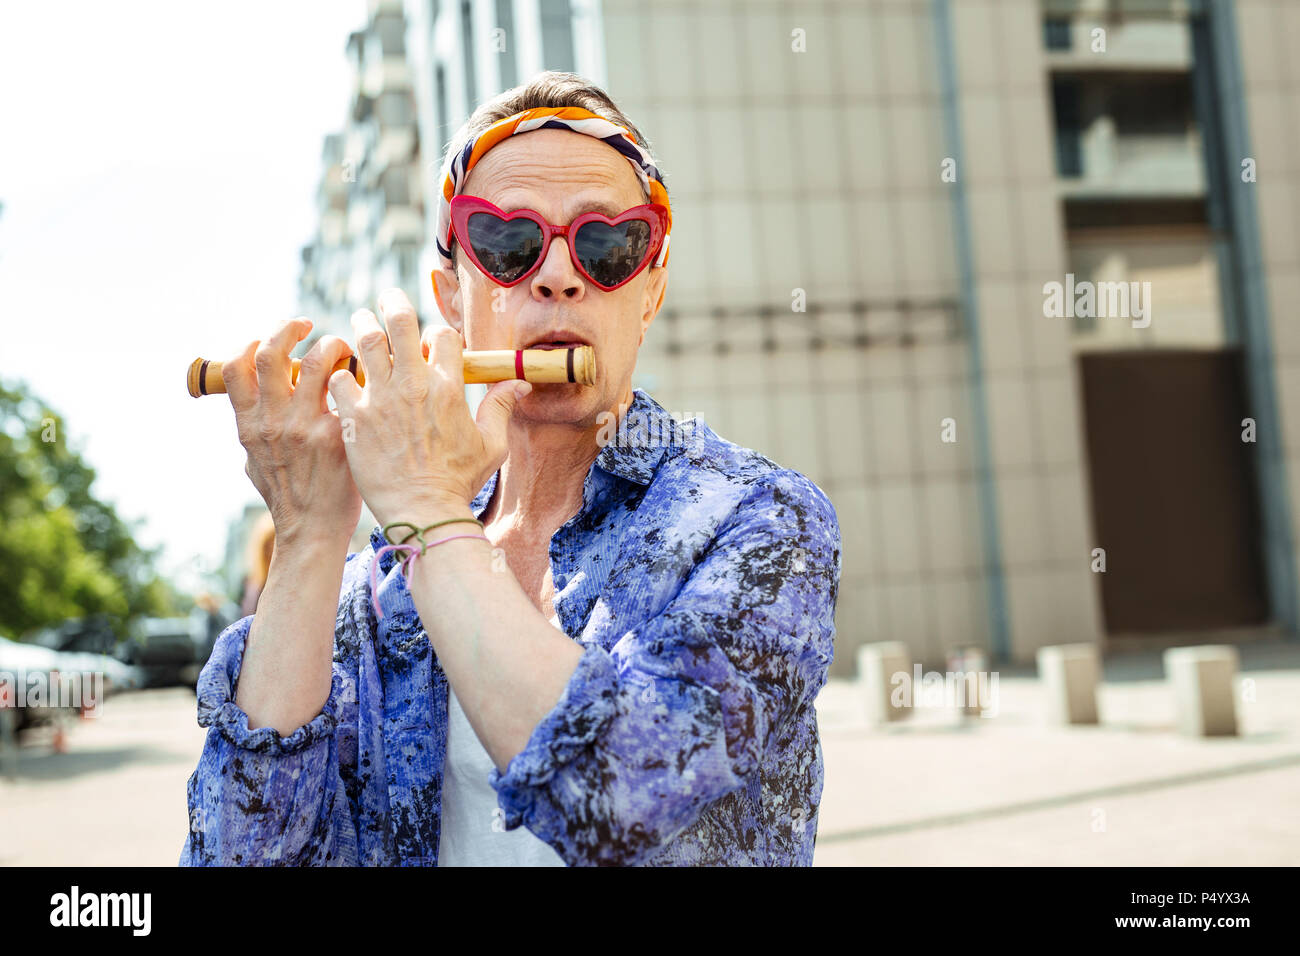 Flower-child wearing red heart glasses playing the harmonica Stock Photo